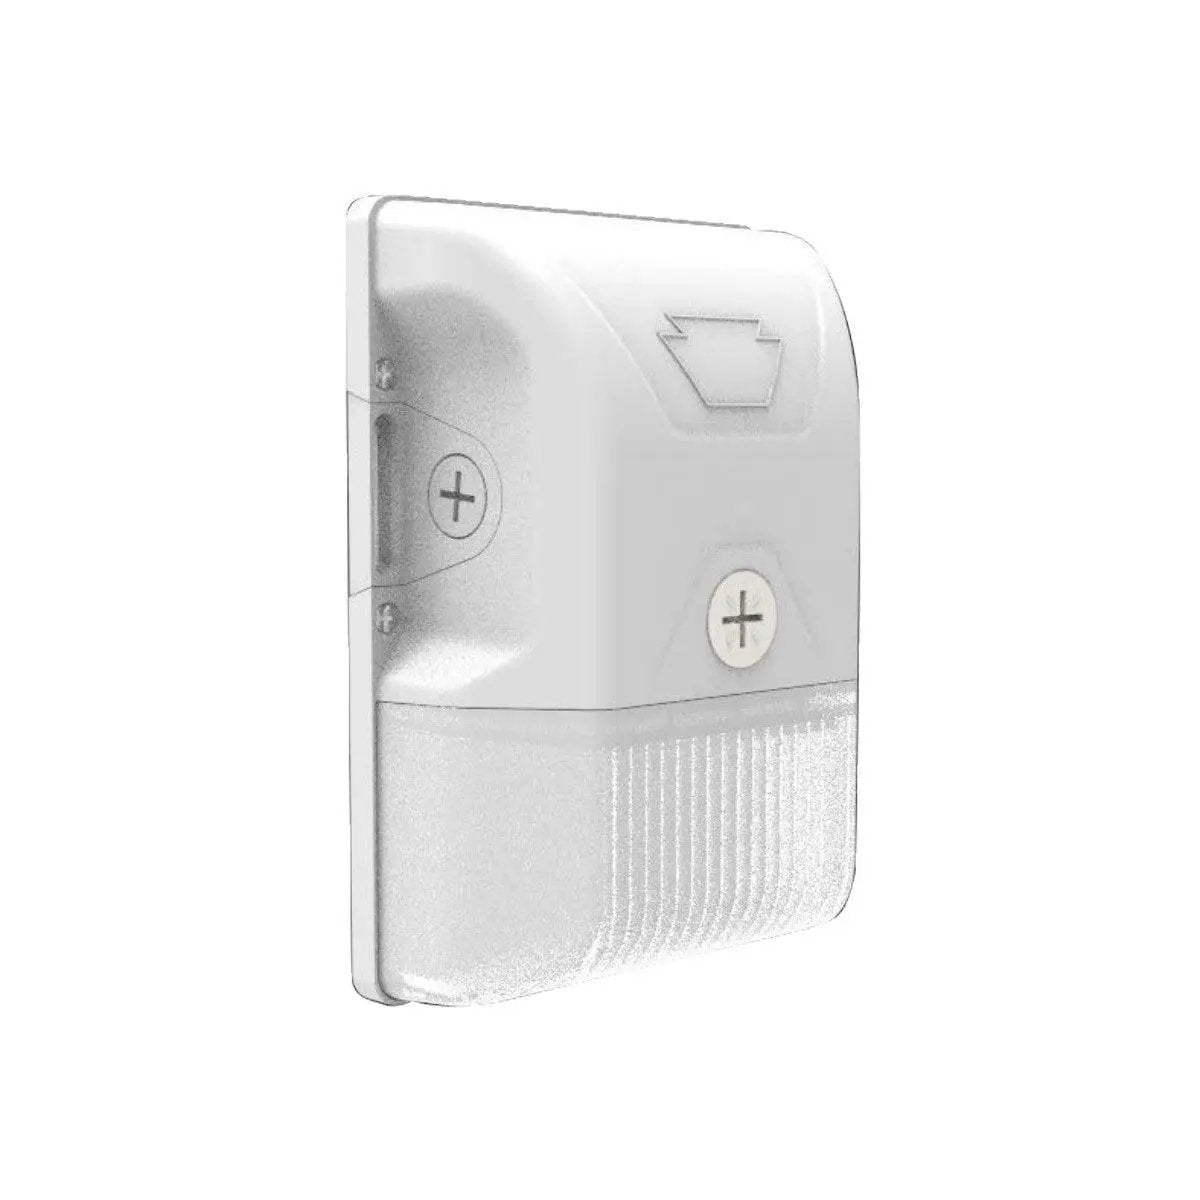 LED Mini Wall Pack with built-in photocell and color select technology. Provides 2700 lumens of diffused white light. Low profile design for versatile mounting. Ideal for safety and security illumination. IP65 rated and DLC Premium listed. 5-year warranty.